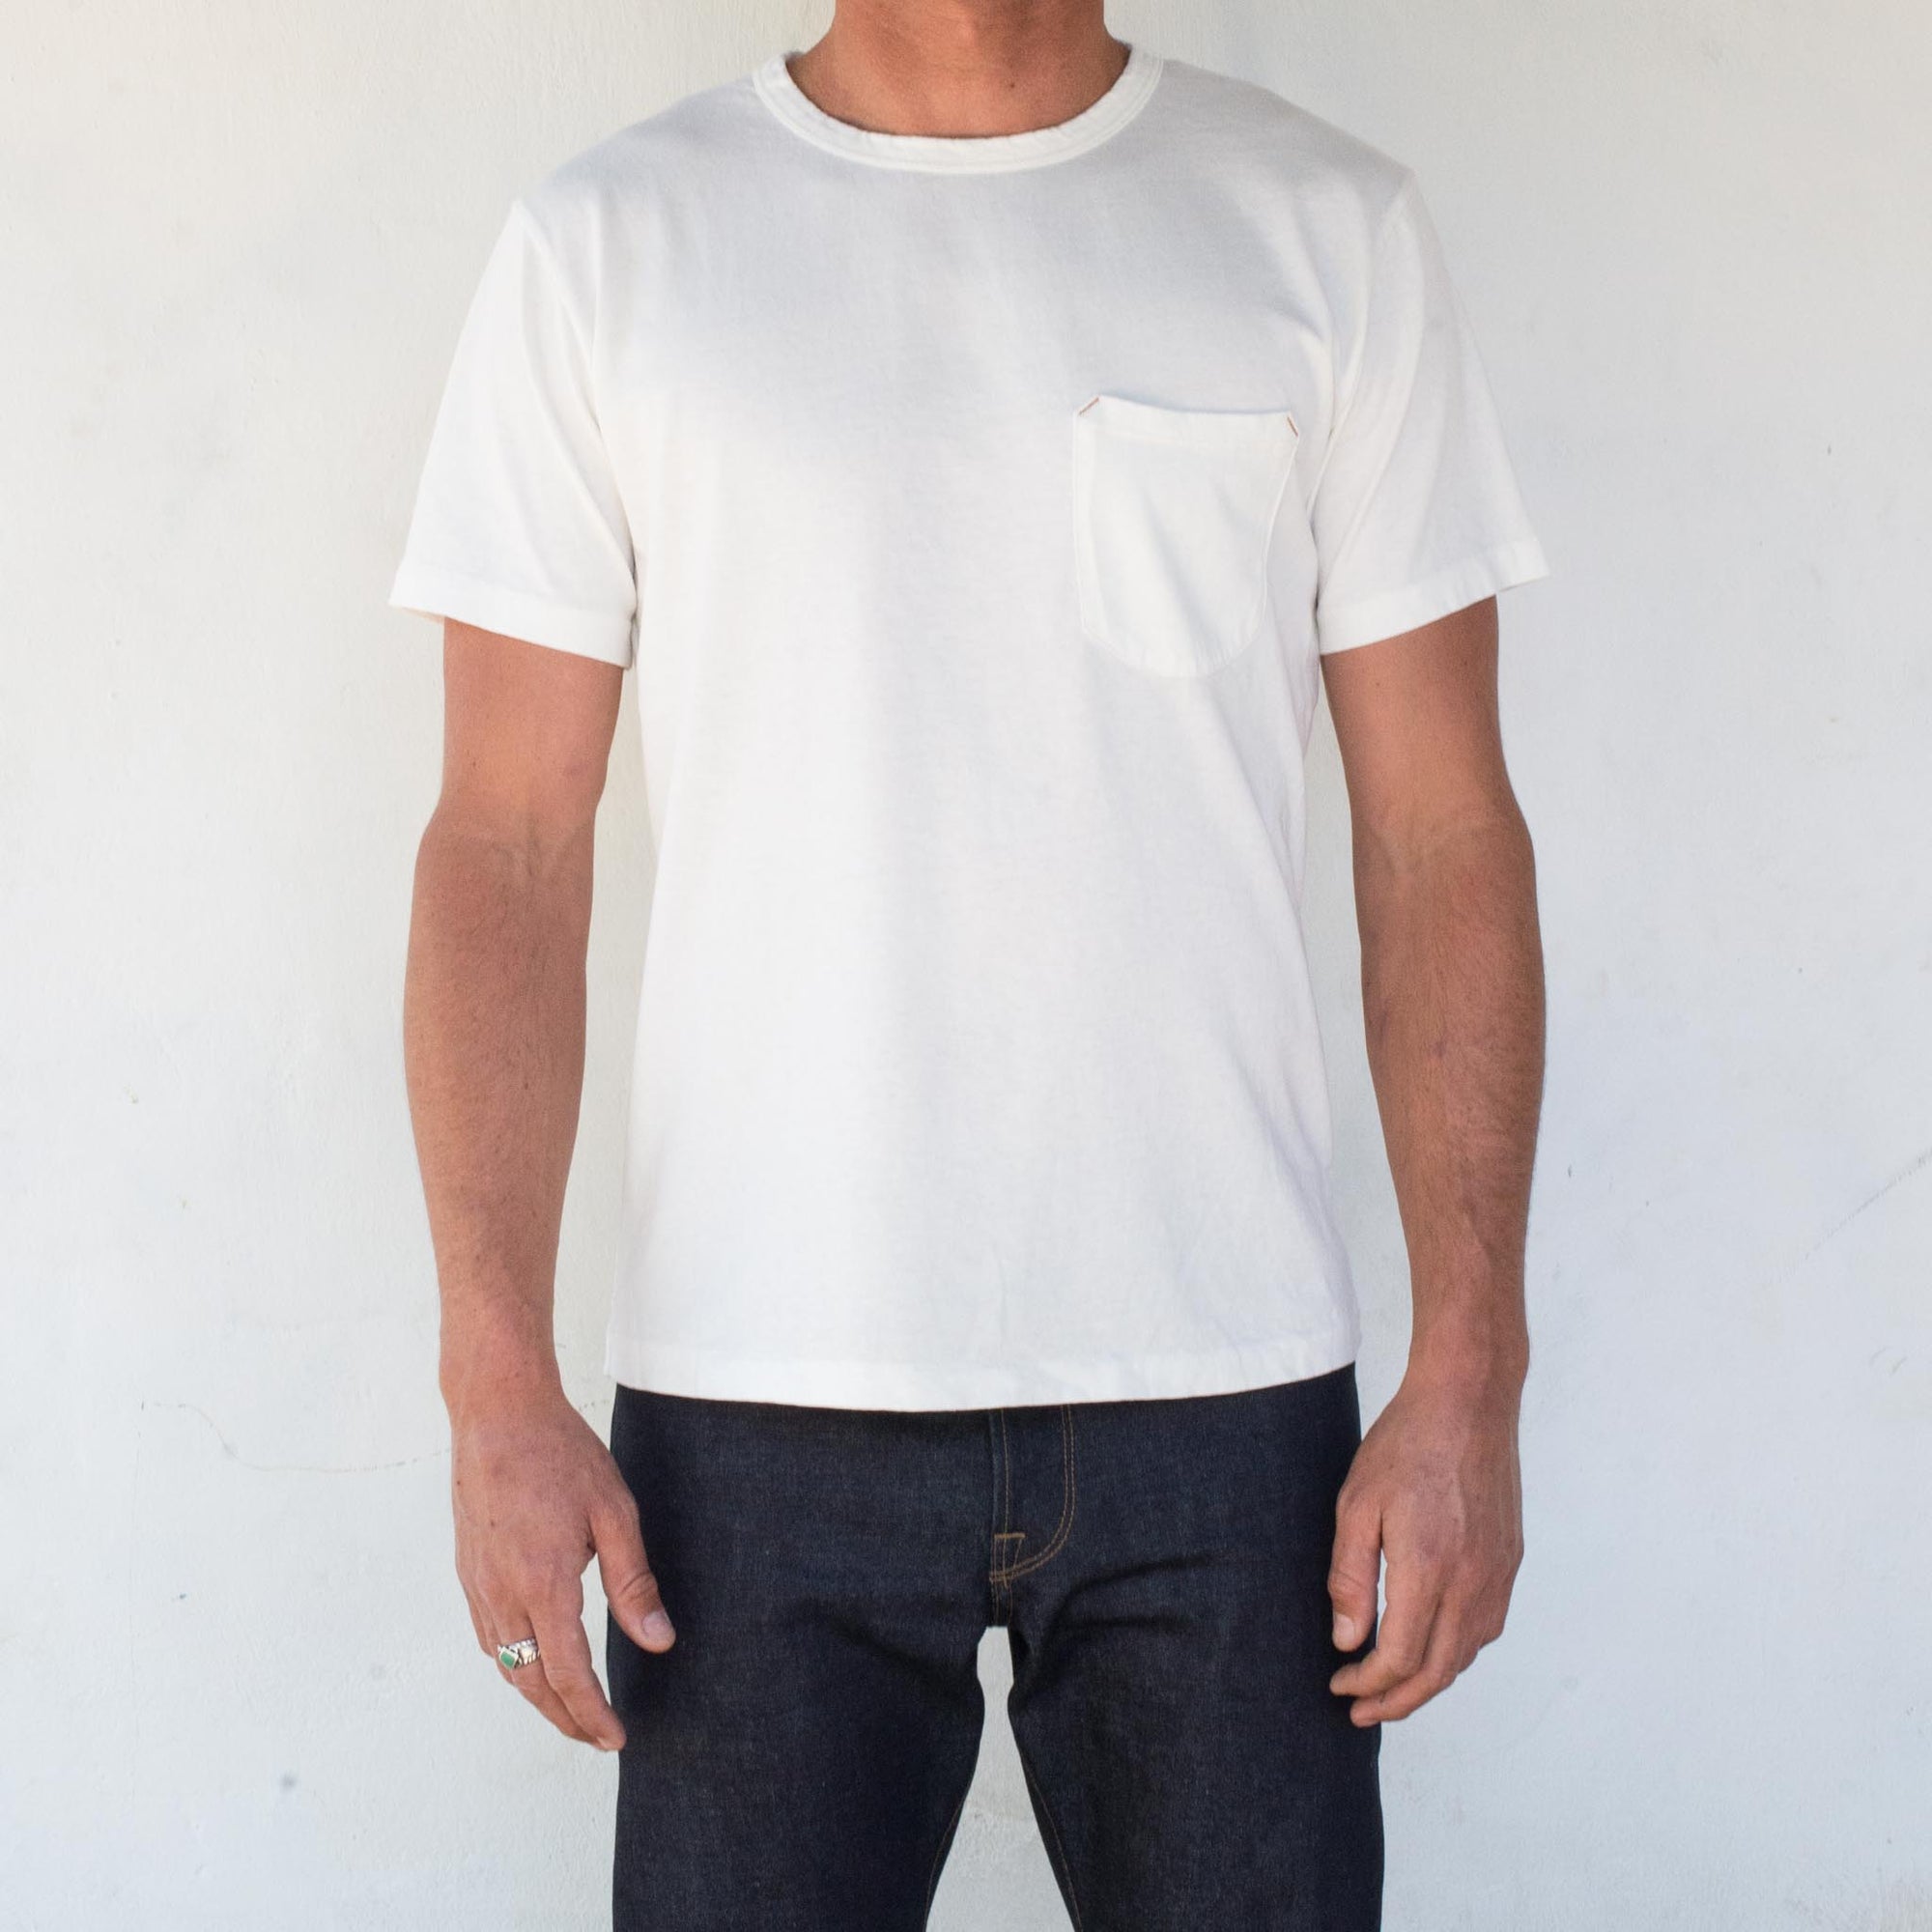 Freenote Cloth 9 Ounce Pocket Tee In White